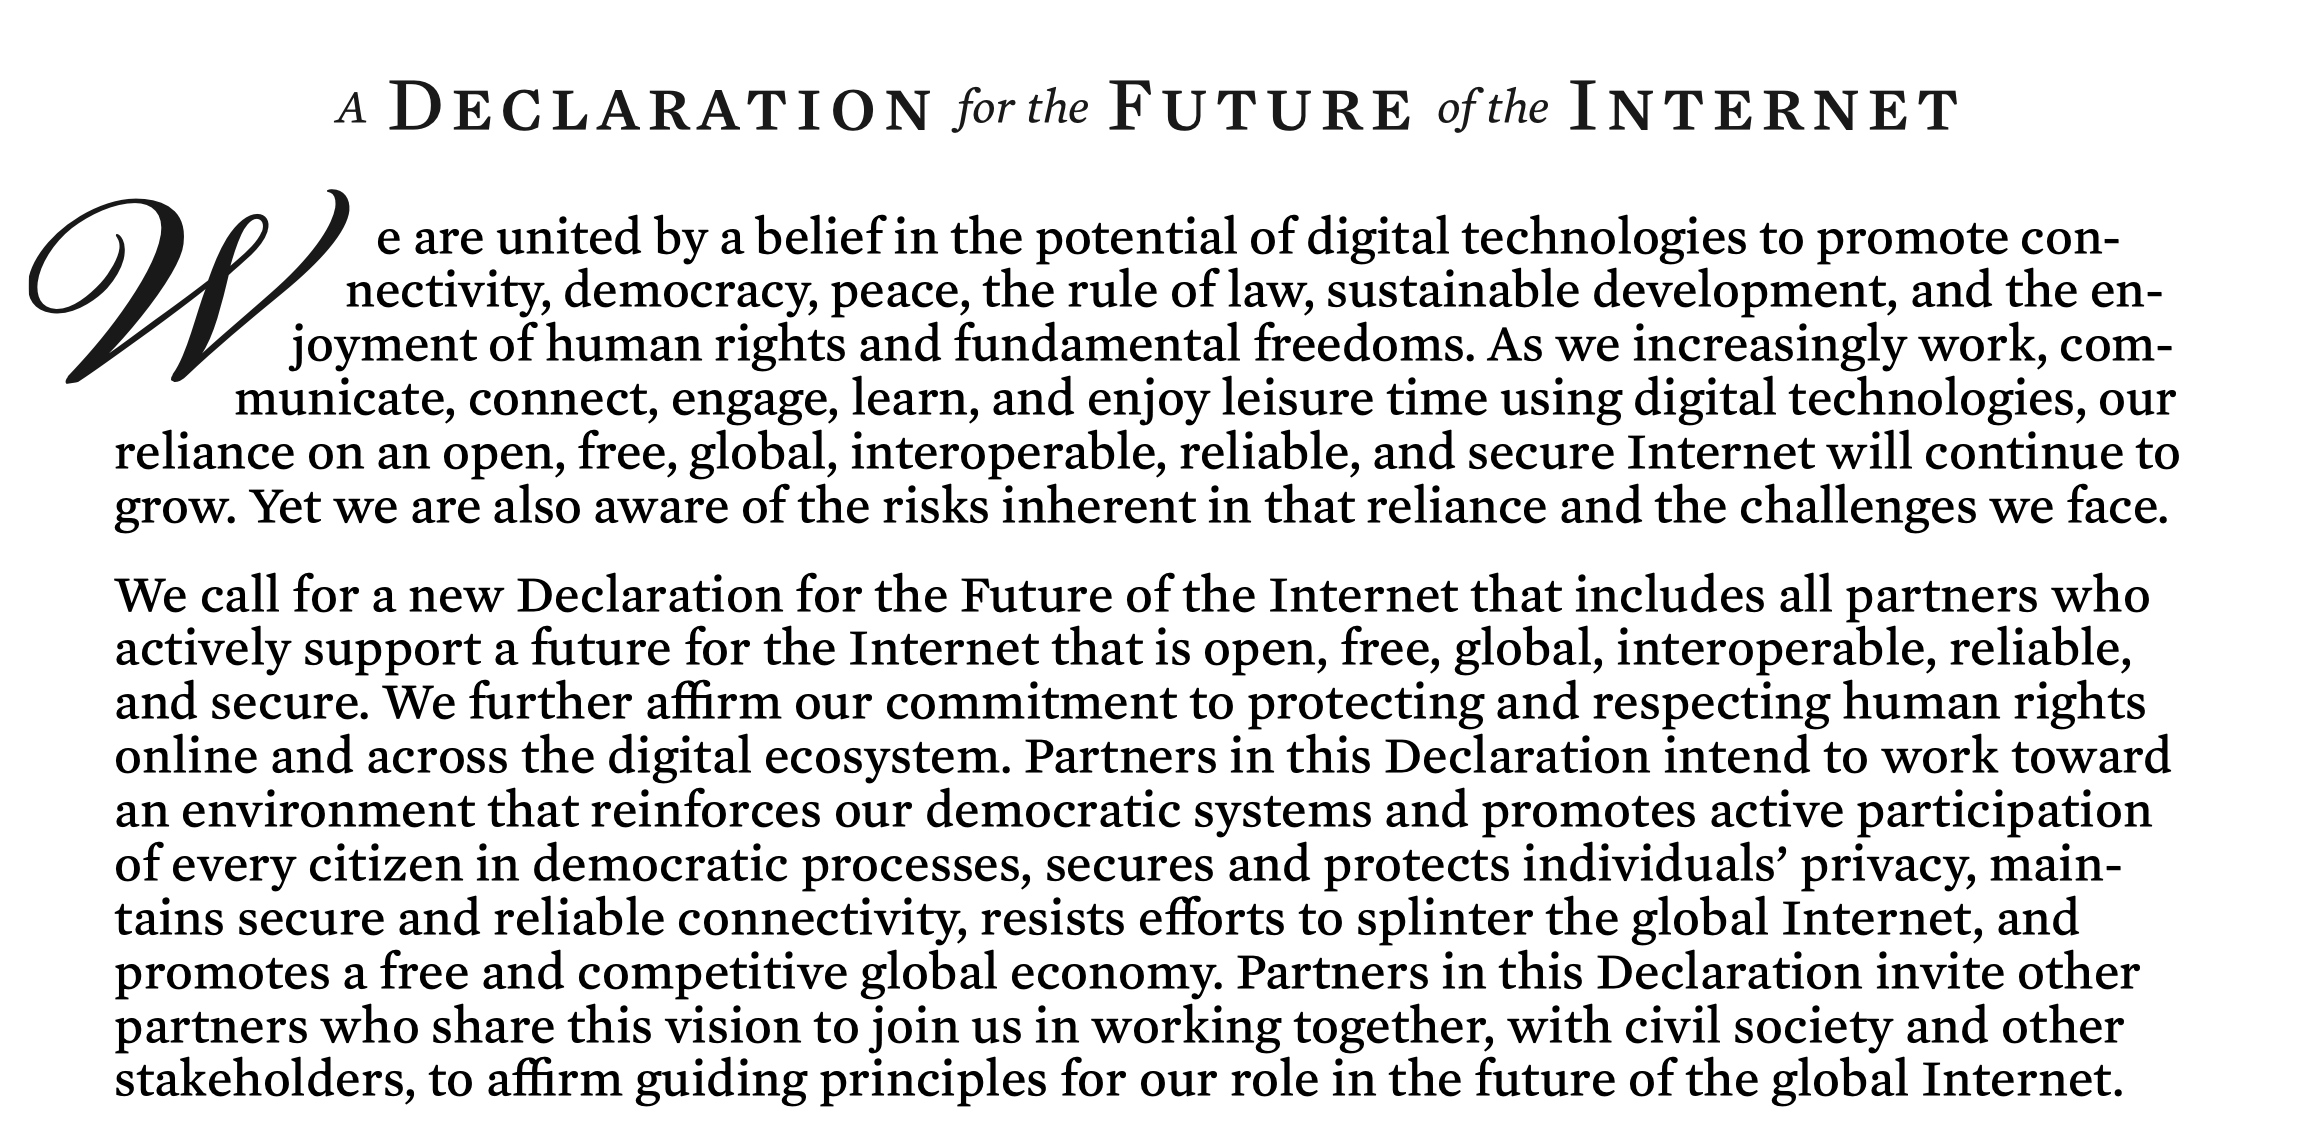 A Declaration for the Future of the Internet